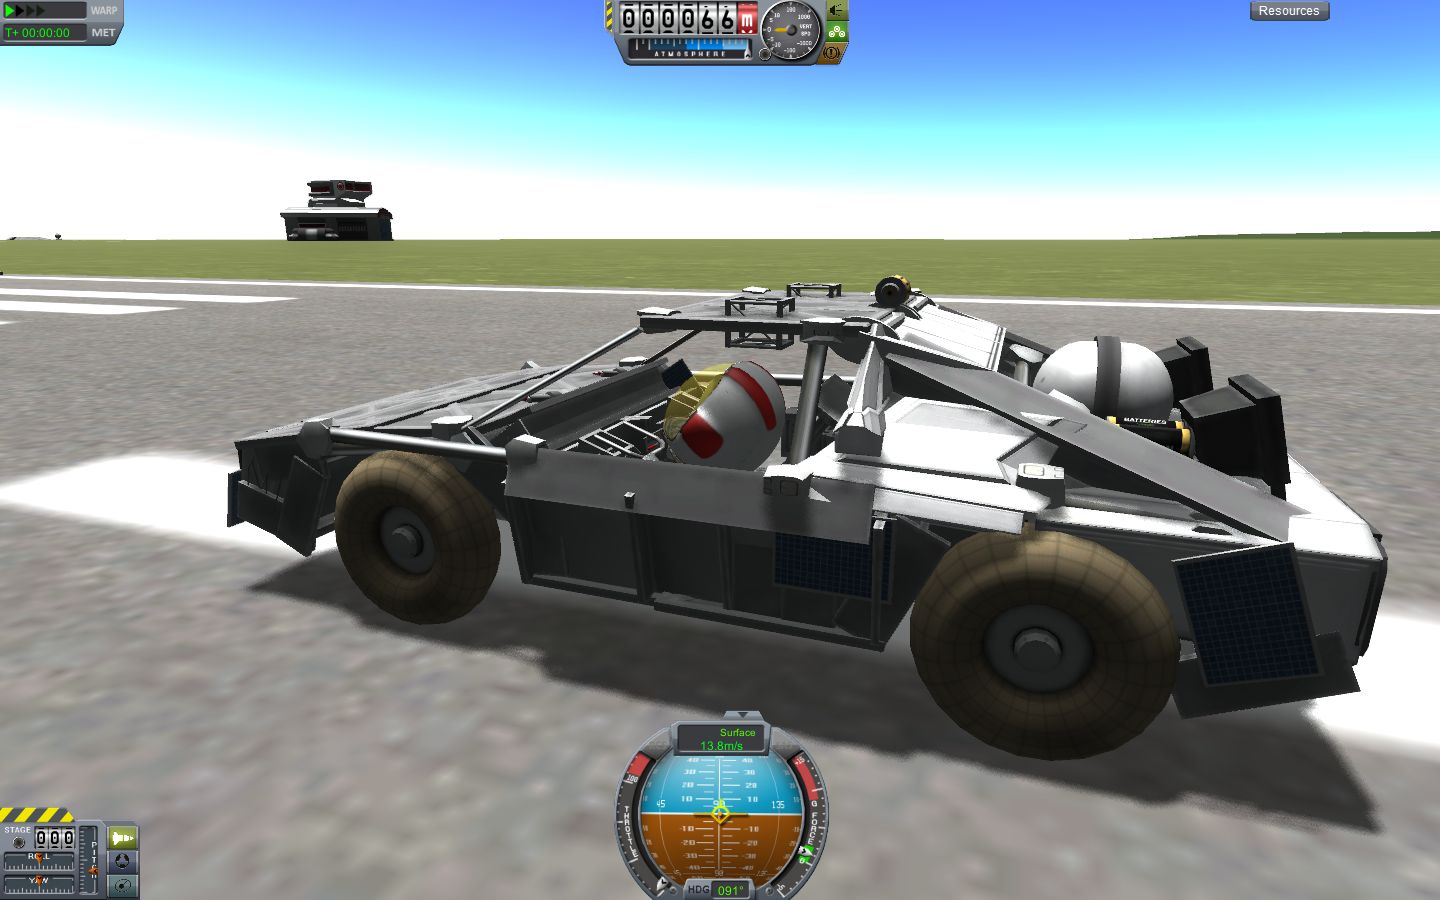 Roads? Where Jeb's going, he doesn't need roads. (A rocket might help 